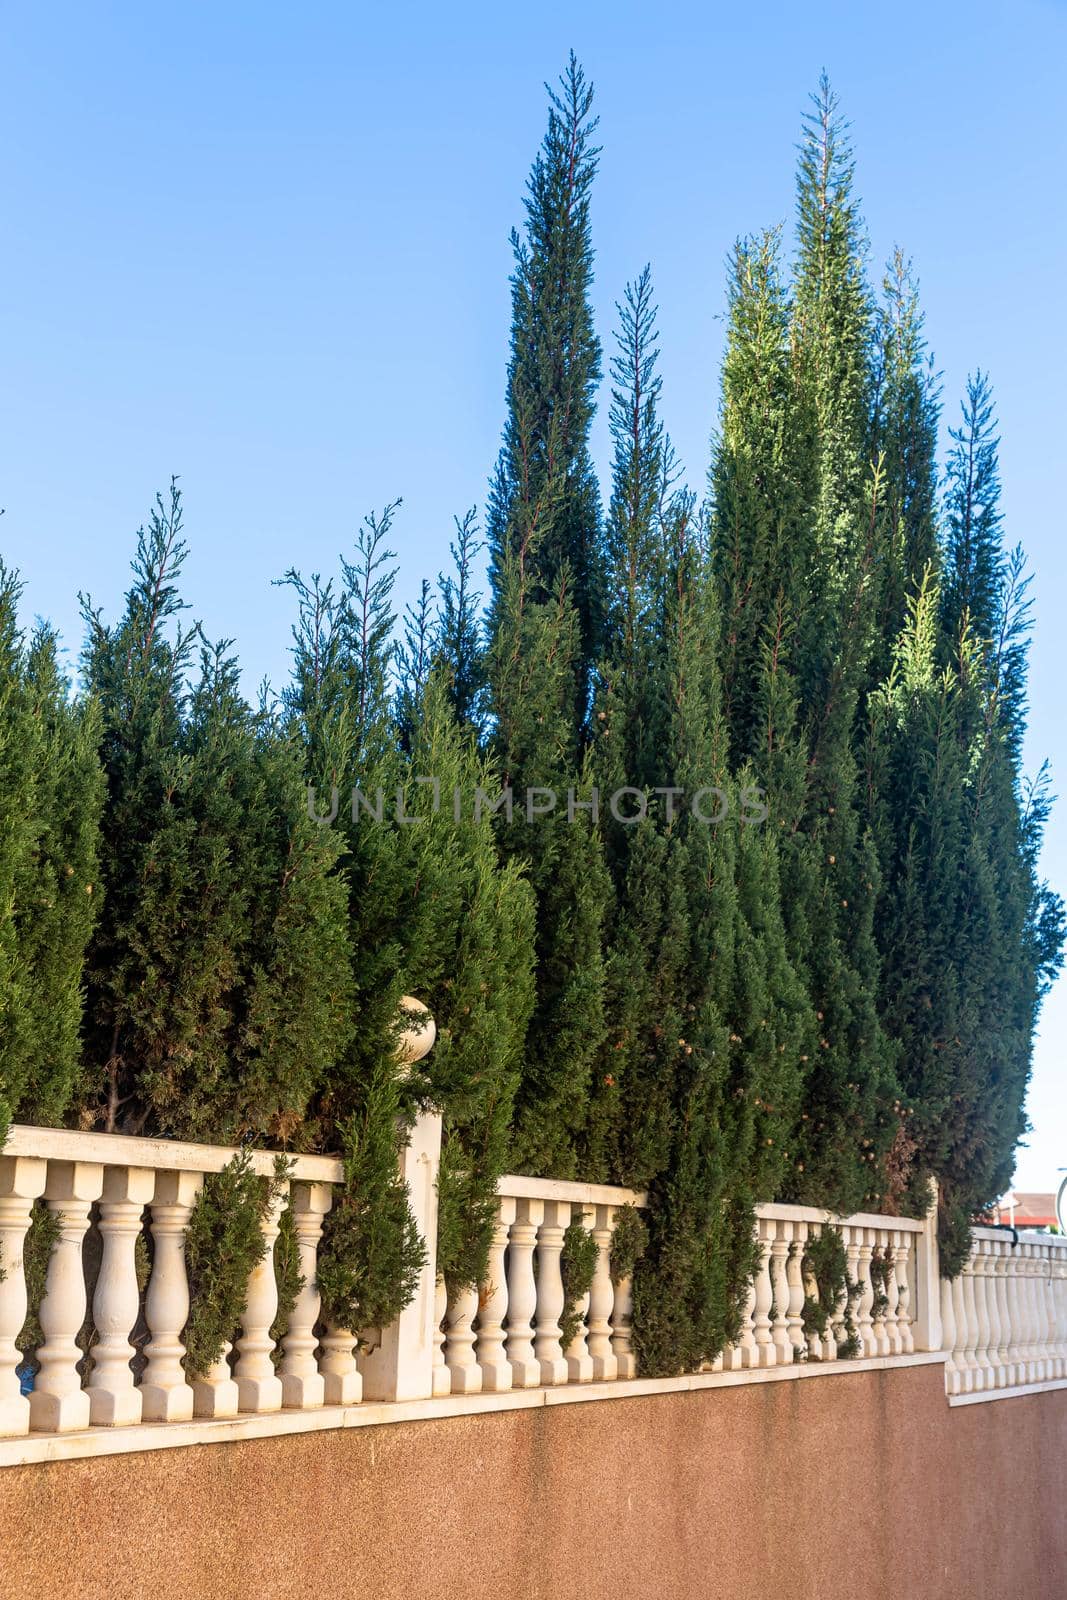 Cypresses grow along the white fence, summer, heat by Milanchikov